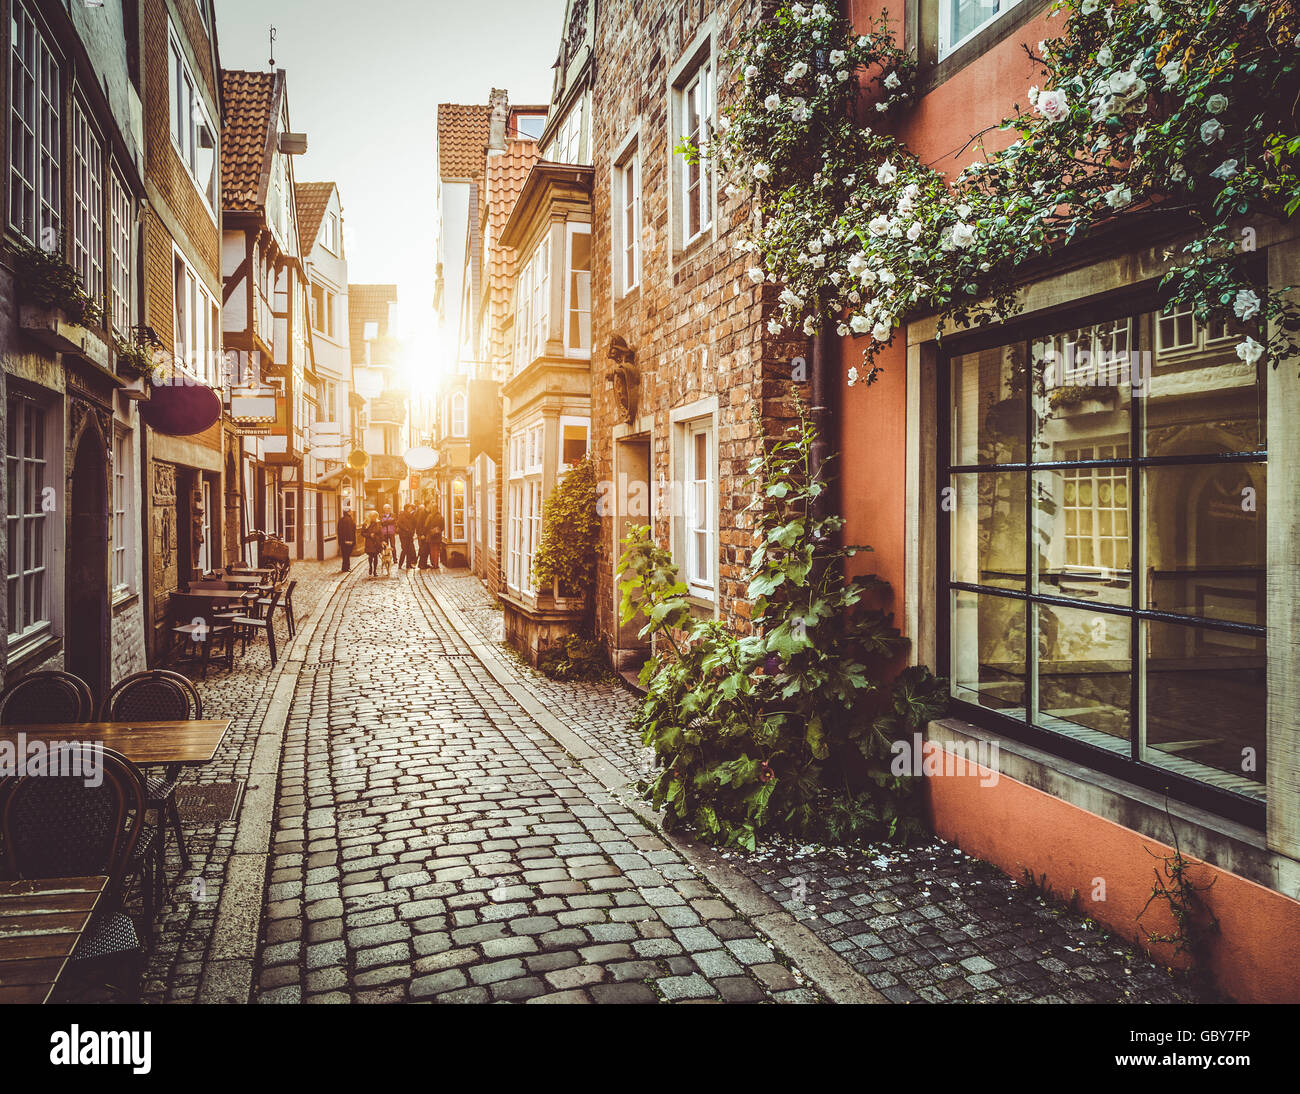 Enchanting old town in Europe in beautiful golden evening light at sunset in summer with retro vintage Instagram style filter and lens flare effect Stock Photo